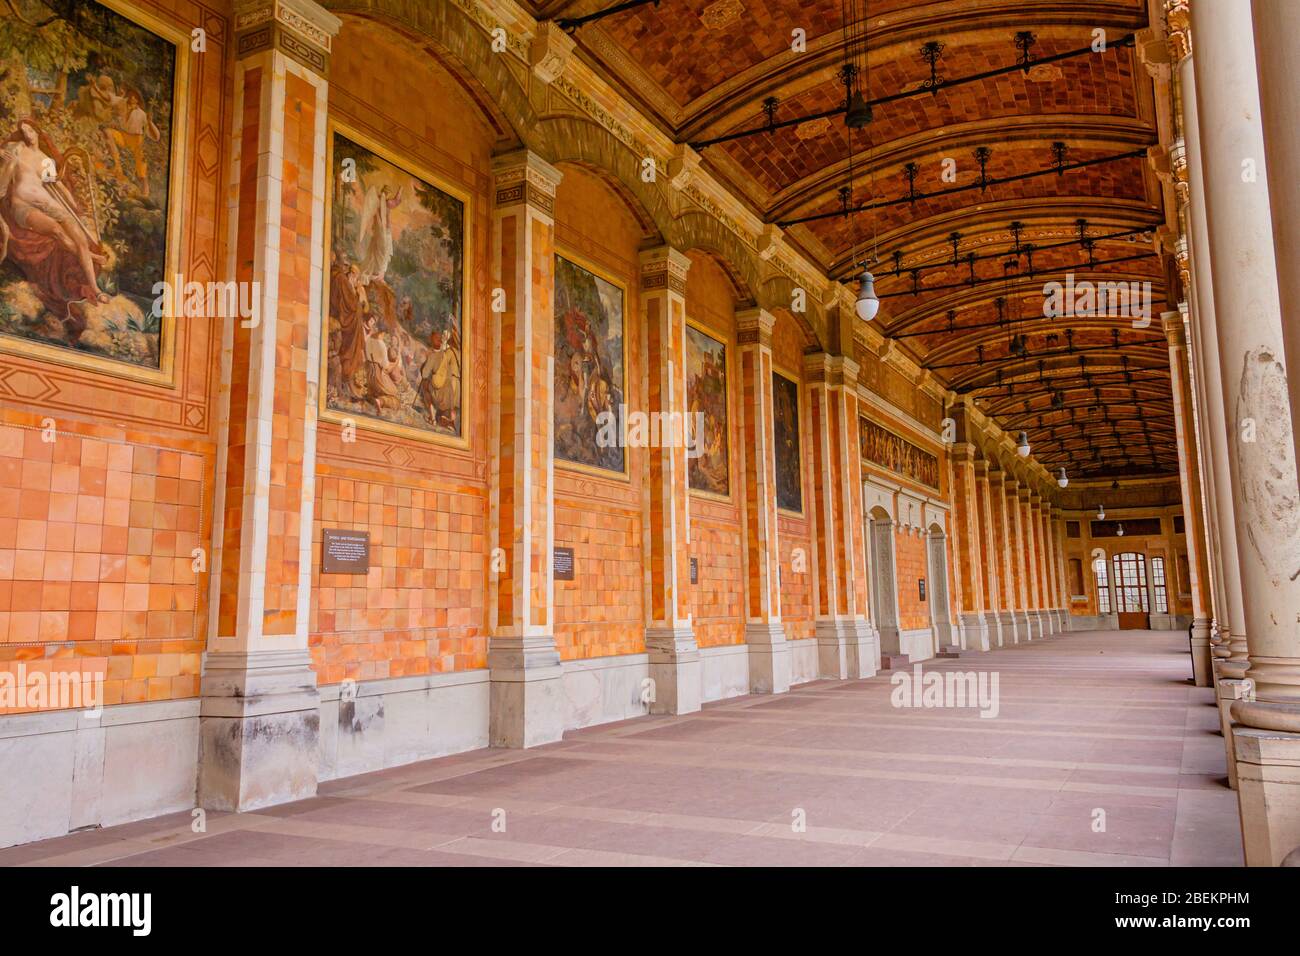 Inside the front arcade of the frescoed Trinkhalle, or pump house, part of the Kurhaus complex in the spa town of Baden-Baden, Germany. January 2020. Stock Photo